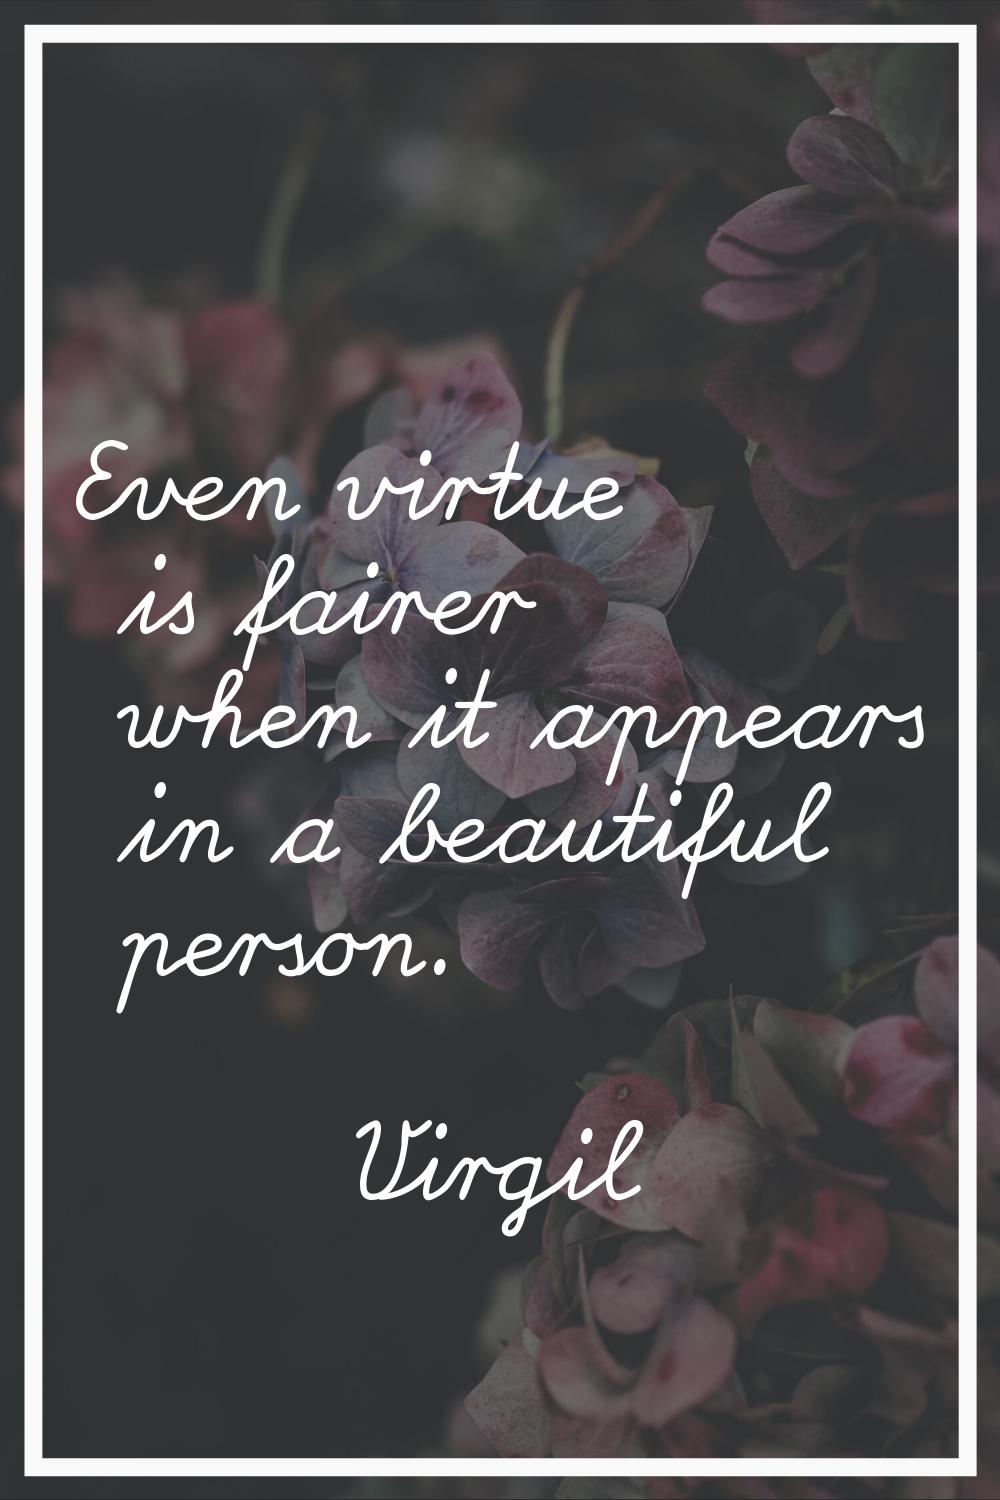 Even virtue is fairer when it appears in a beautiful person.